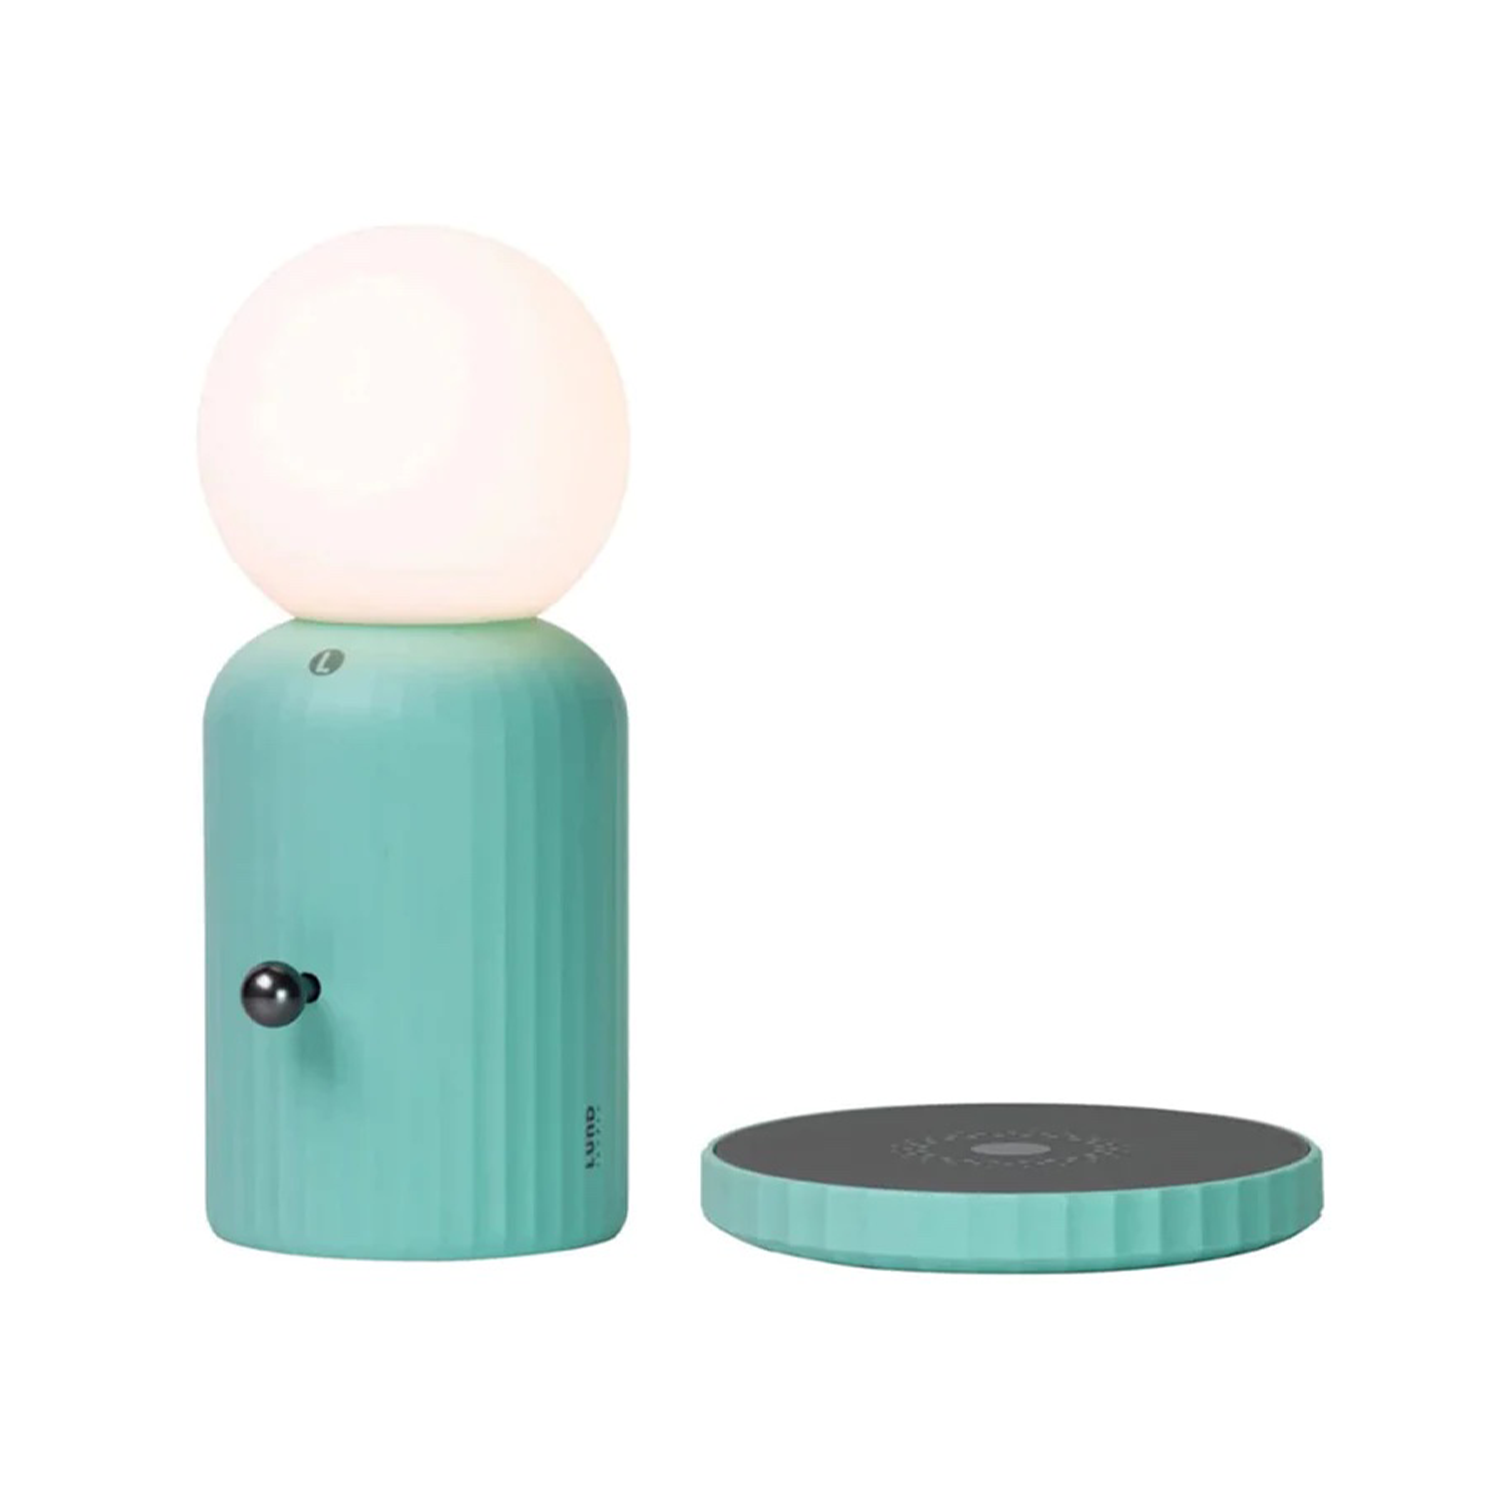 Skittle Lamp by Lund London in Mint